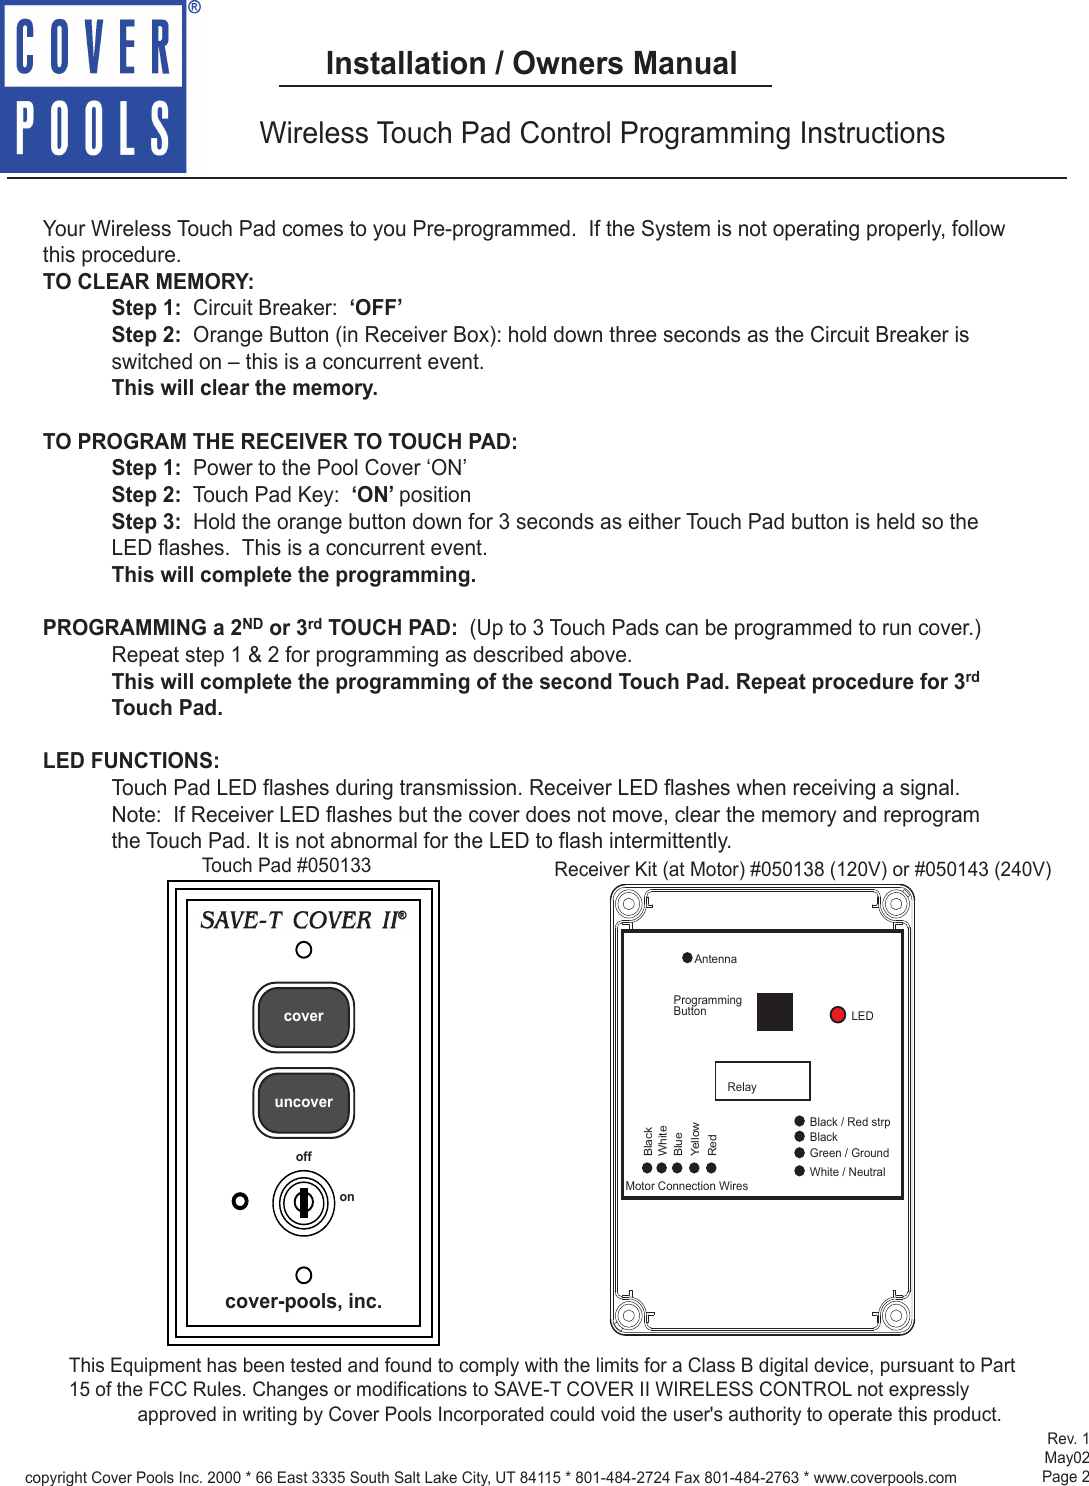 Cover Pools 50134 Model SAVE-T Cover II pool cover controller User Manual  installation owners manual indd Basic Electrical Diagram Symbols UserManual.wiki